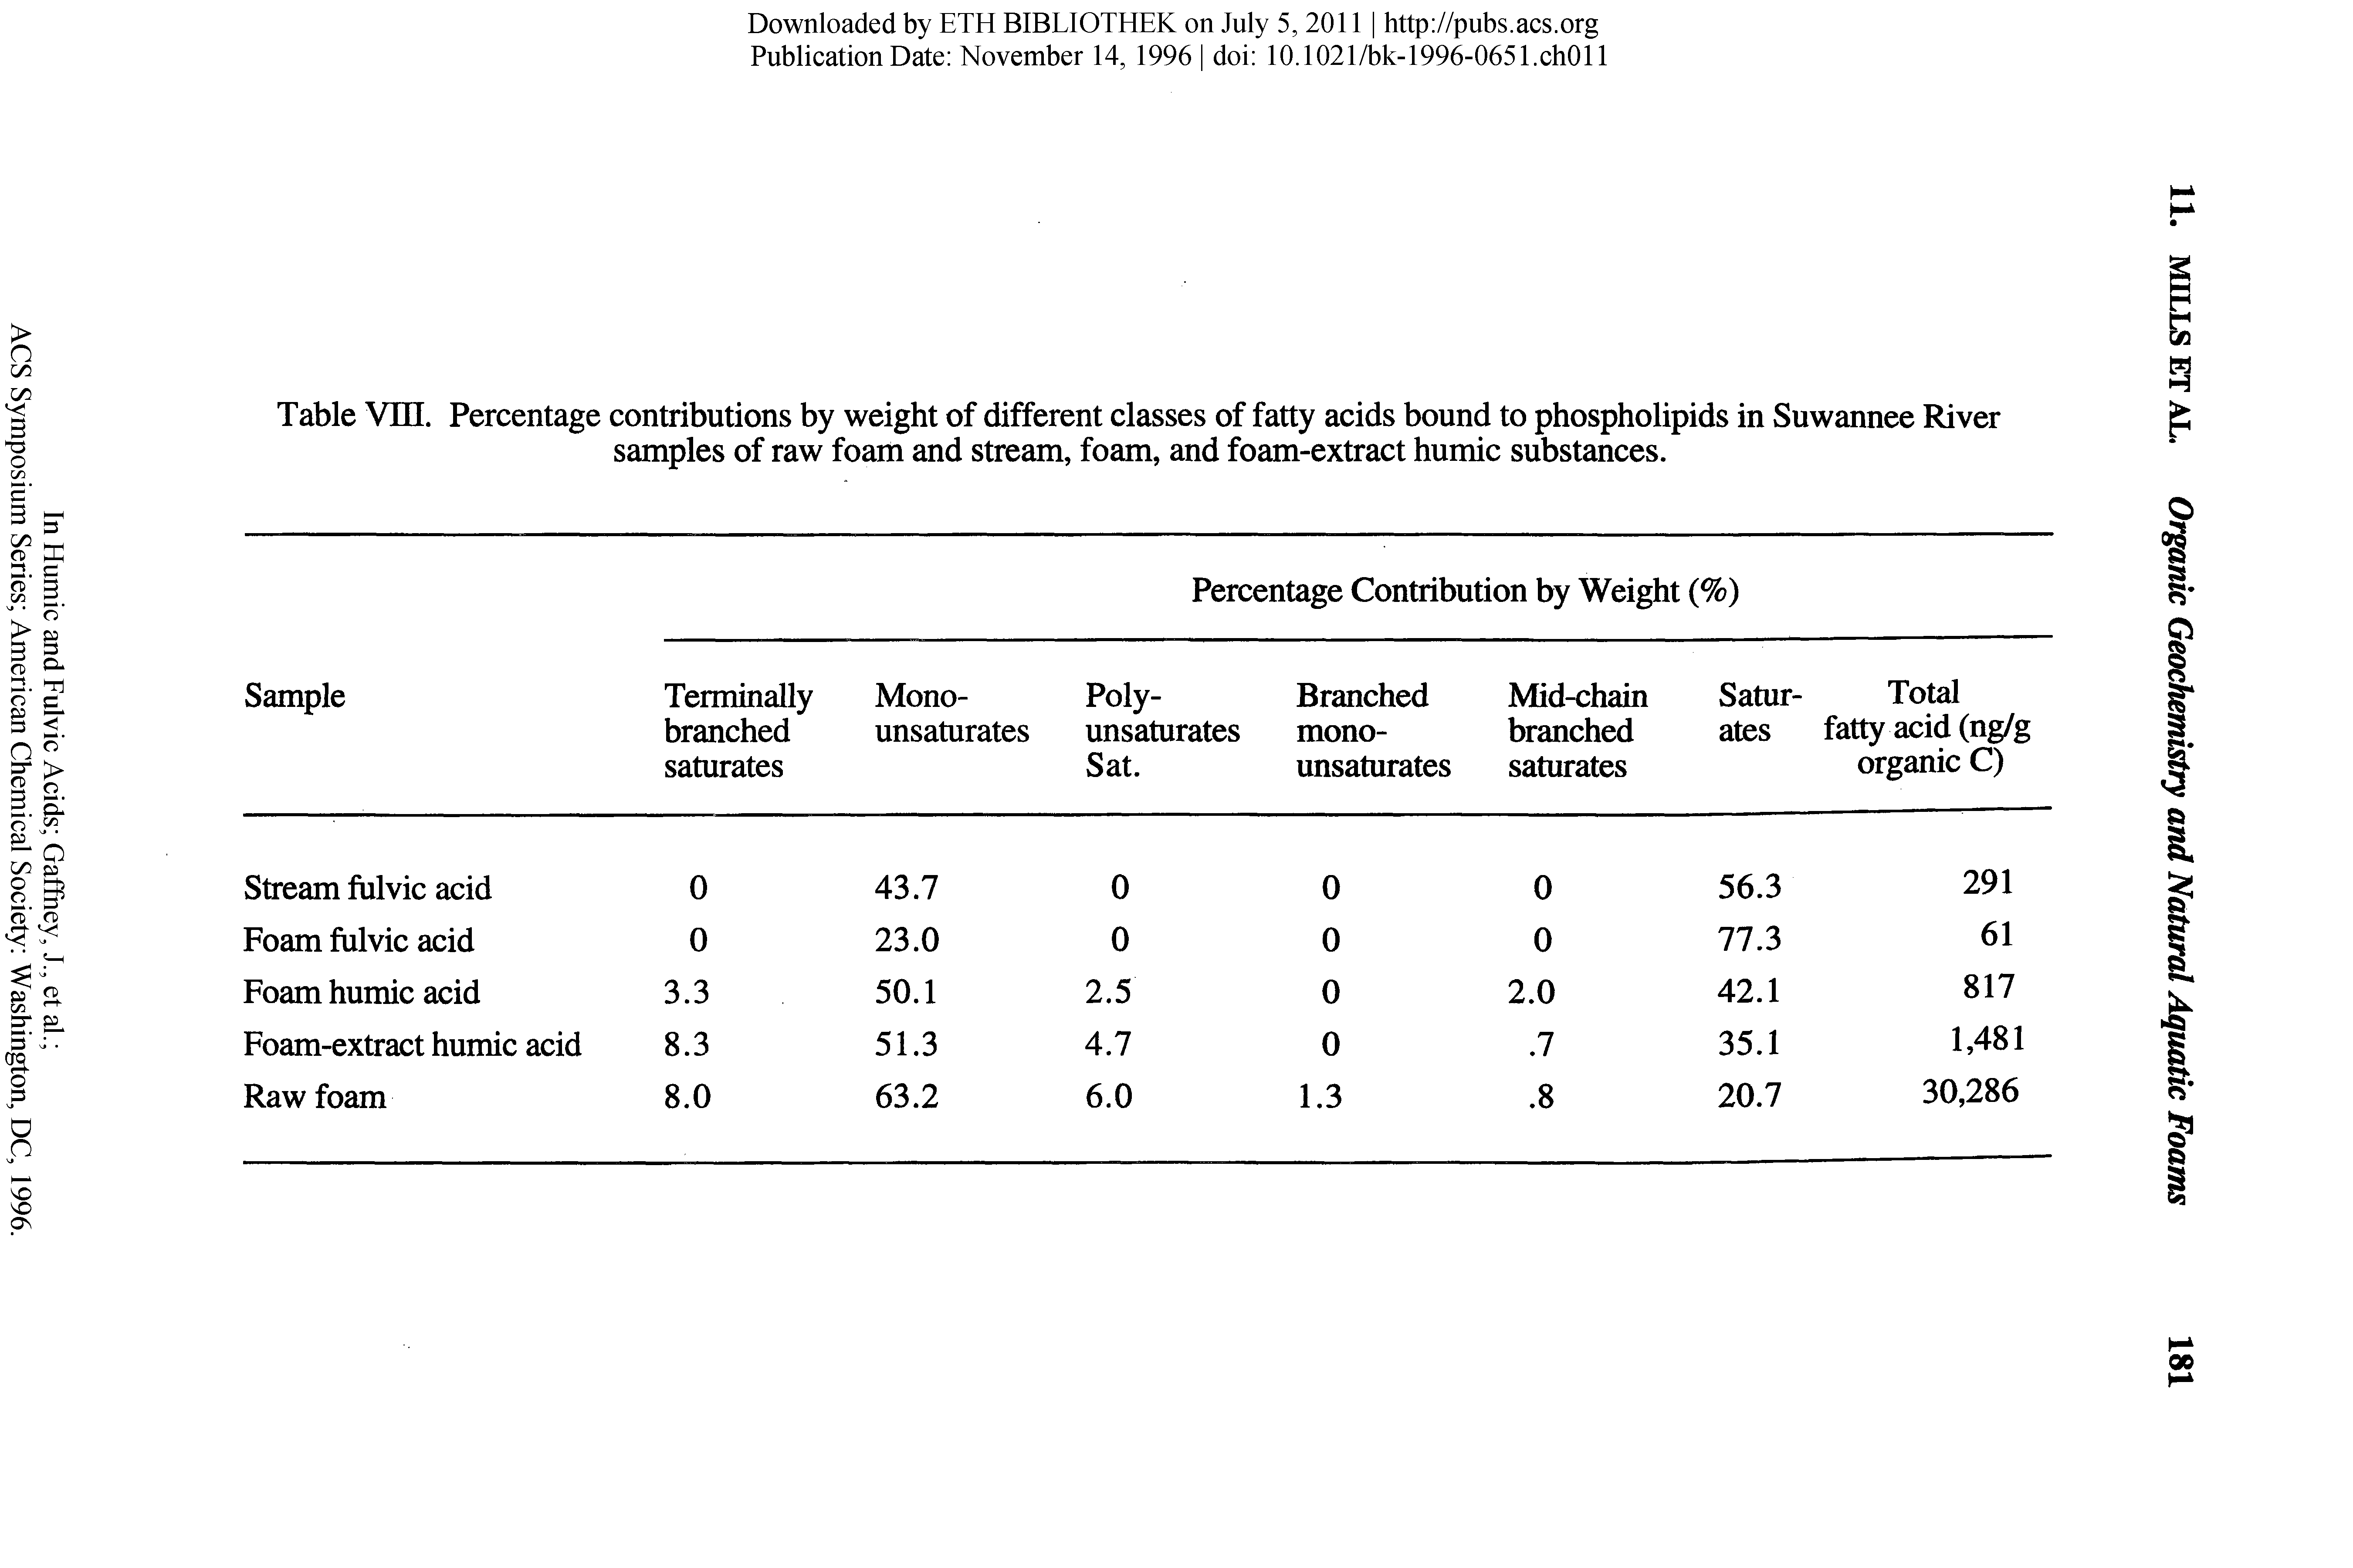 Table Vin. Percentage contributions by weight of different classes of fatty acids bound to phospholipids in Suwannee River samples of raw foam and stream, foam, and foam-extract humic substances.